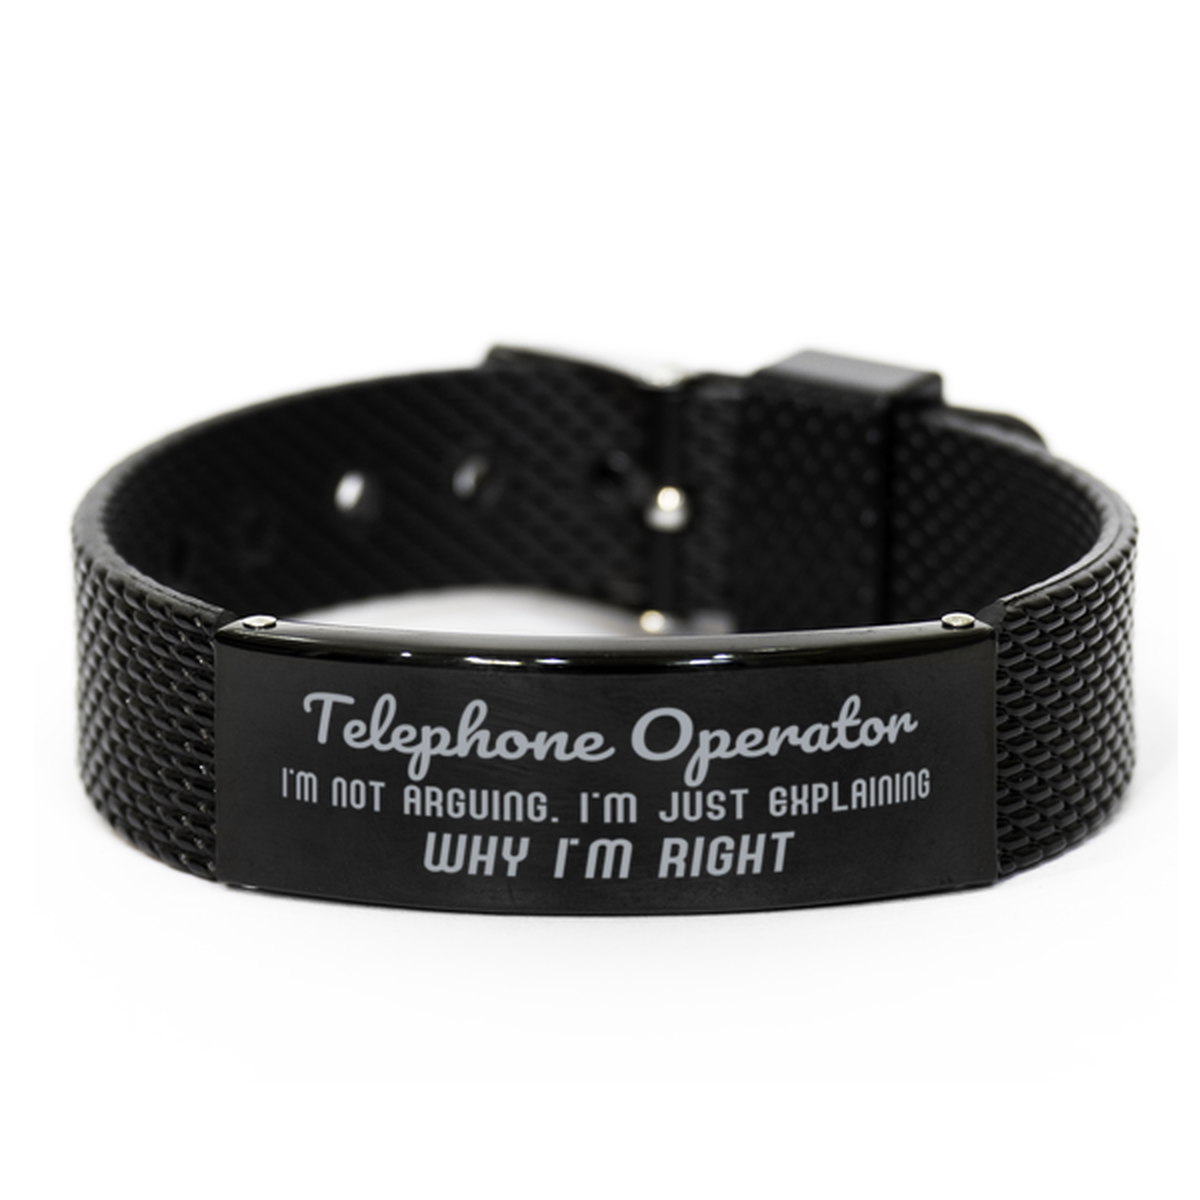 Telephone Operator I'm not Arguing. I'm Just Explaining Why I'm RIGHT Black Shark Mesh Bracelet, Funny Saying Quote Telephone Operator Gifts For Telephone Operator Graduation Birthday Christmas Gifts for Men Women Coworker